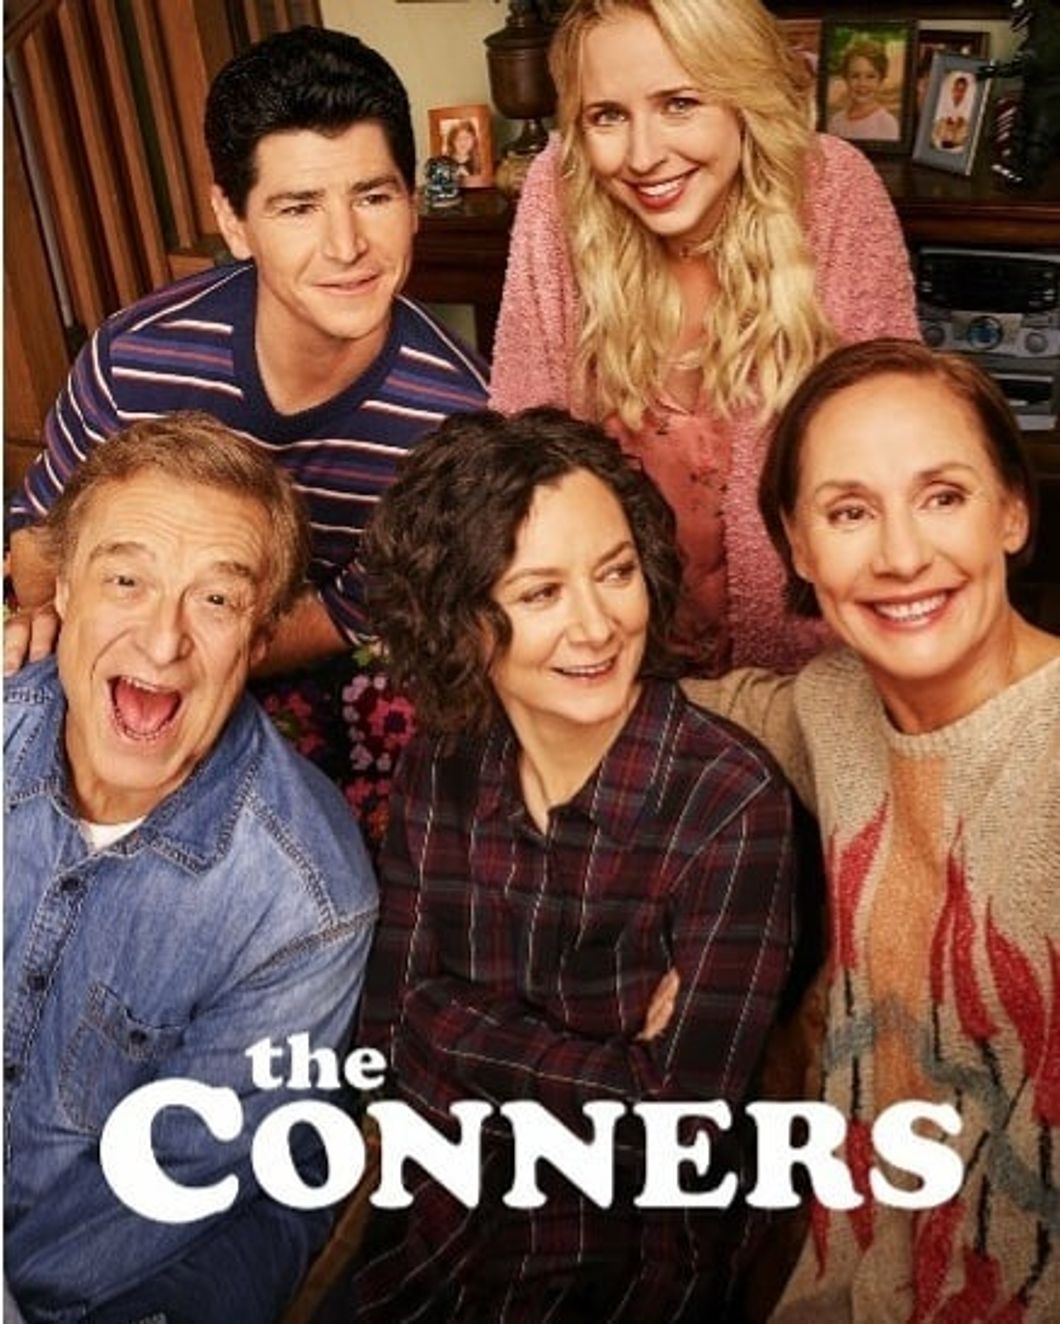 I Lost A Parent To Opioids, And I Think 'The Conners' Represented That Kind Of Loss Perfectly